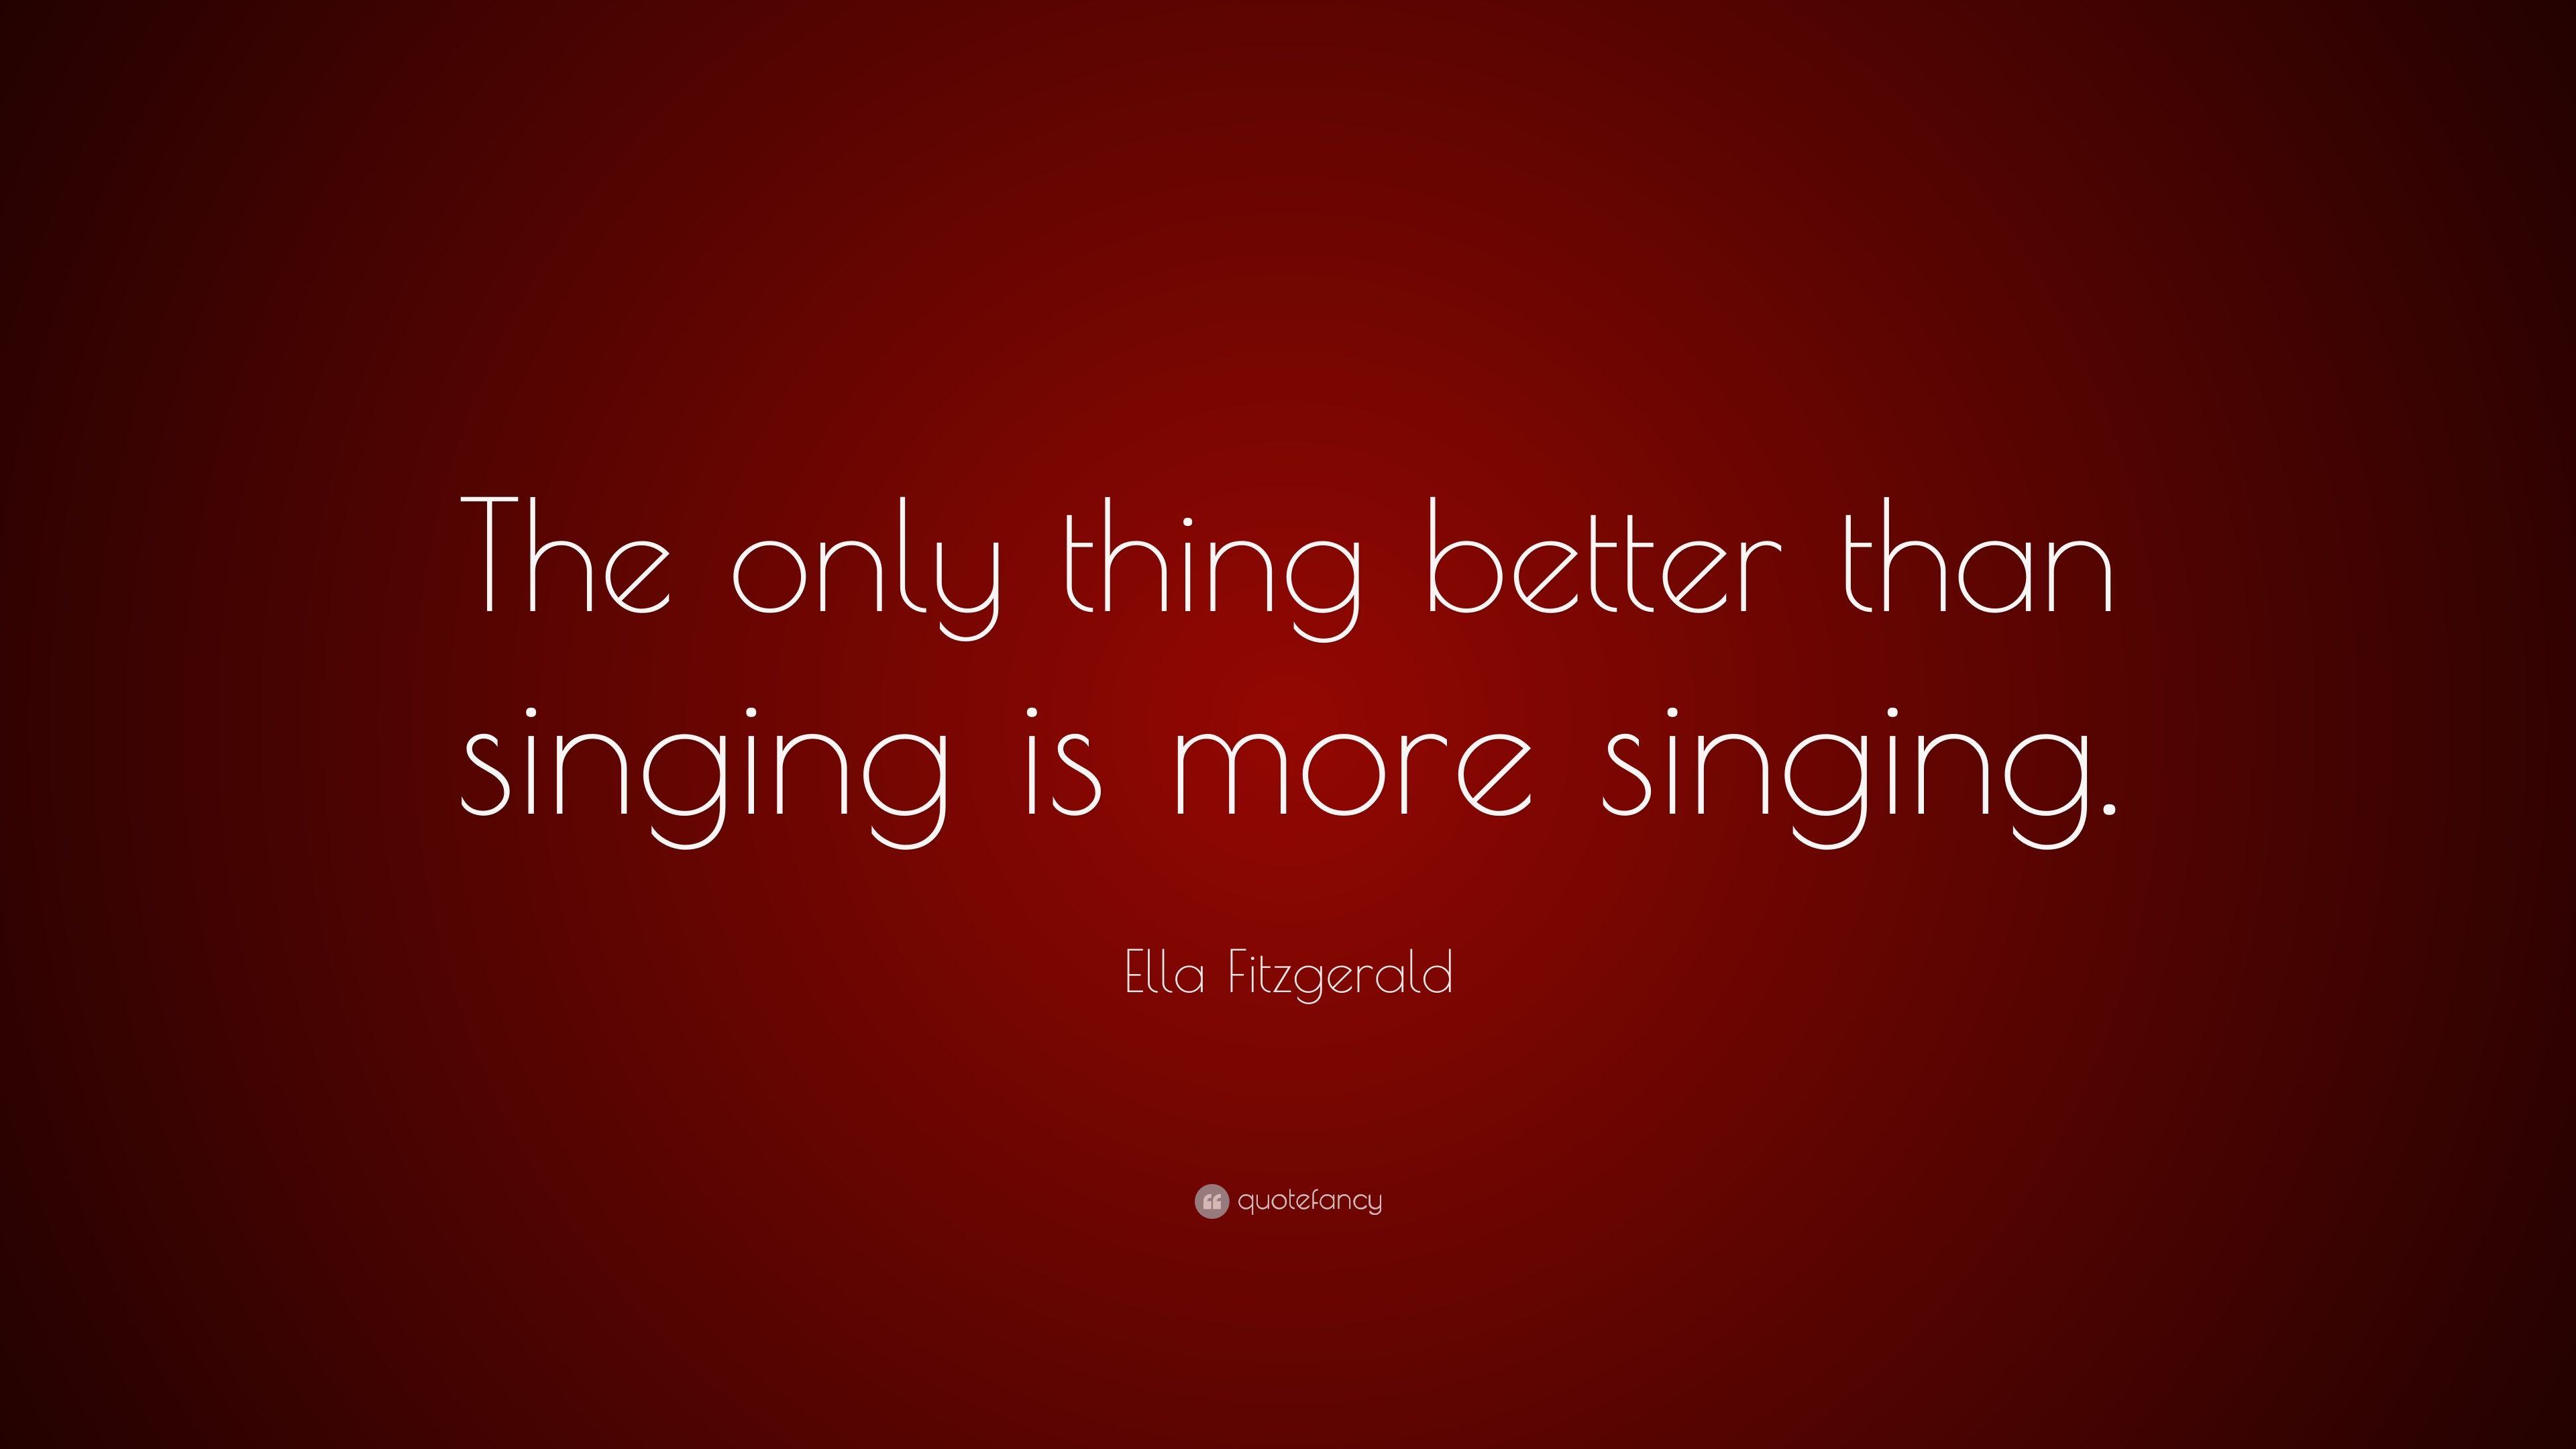 Ella Fitzgerald Quote: “The only thing better than singing is more singing.” (12 wallpaper)